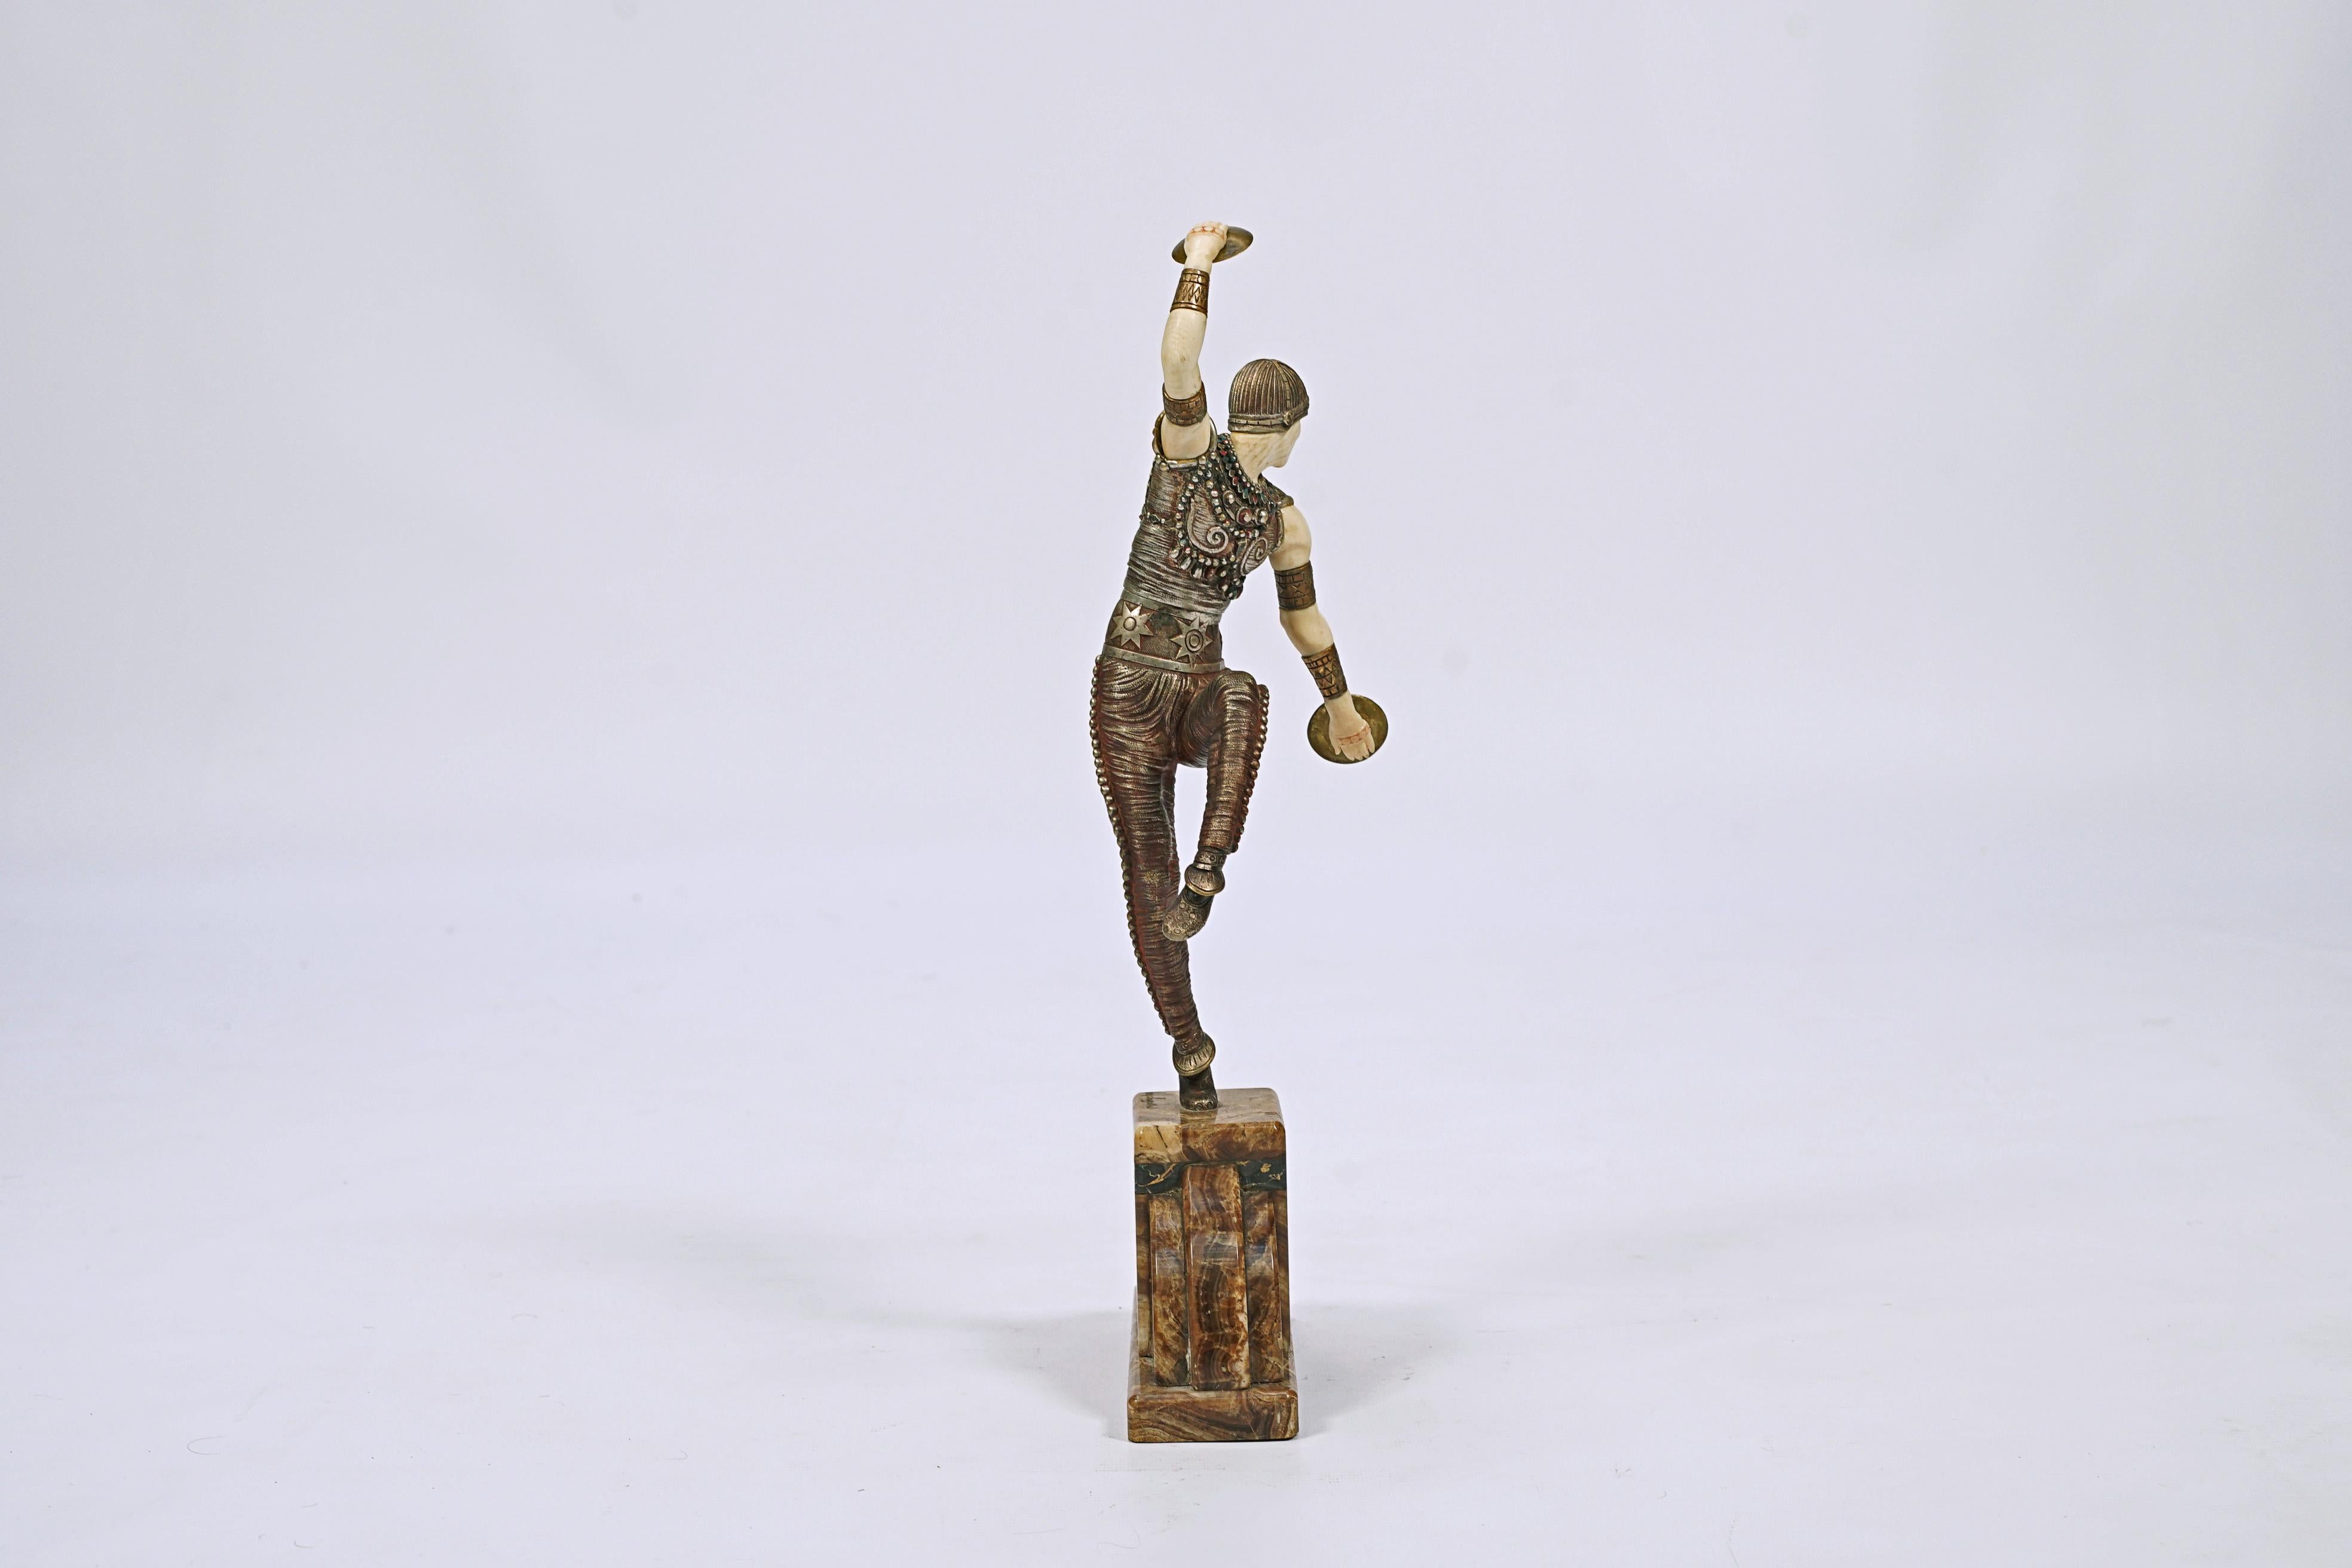 Russian Dancer by Demetre H. Chiparus (1886-1947).Bronze and ivory on marble base.

The statuette depicts the ukrainian dancer Vaslav Nijinsky (1889-1950) in the 